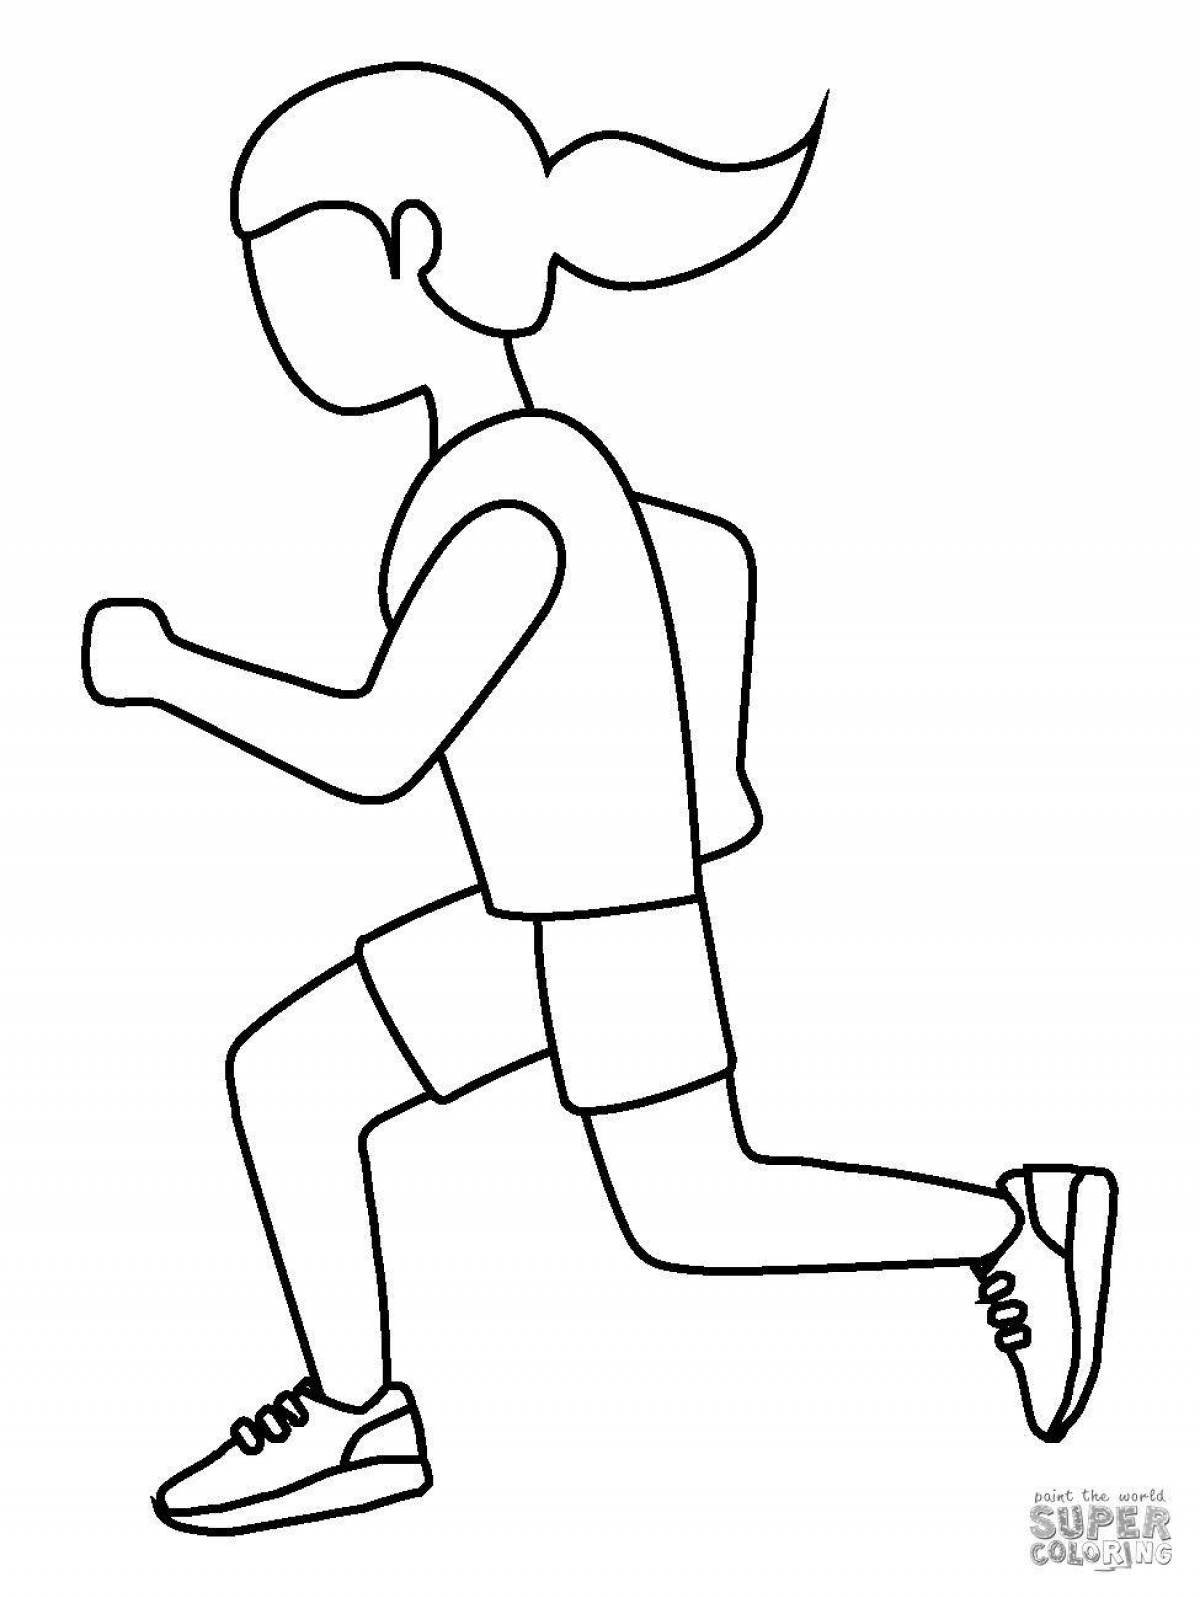 Coloring page brave run